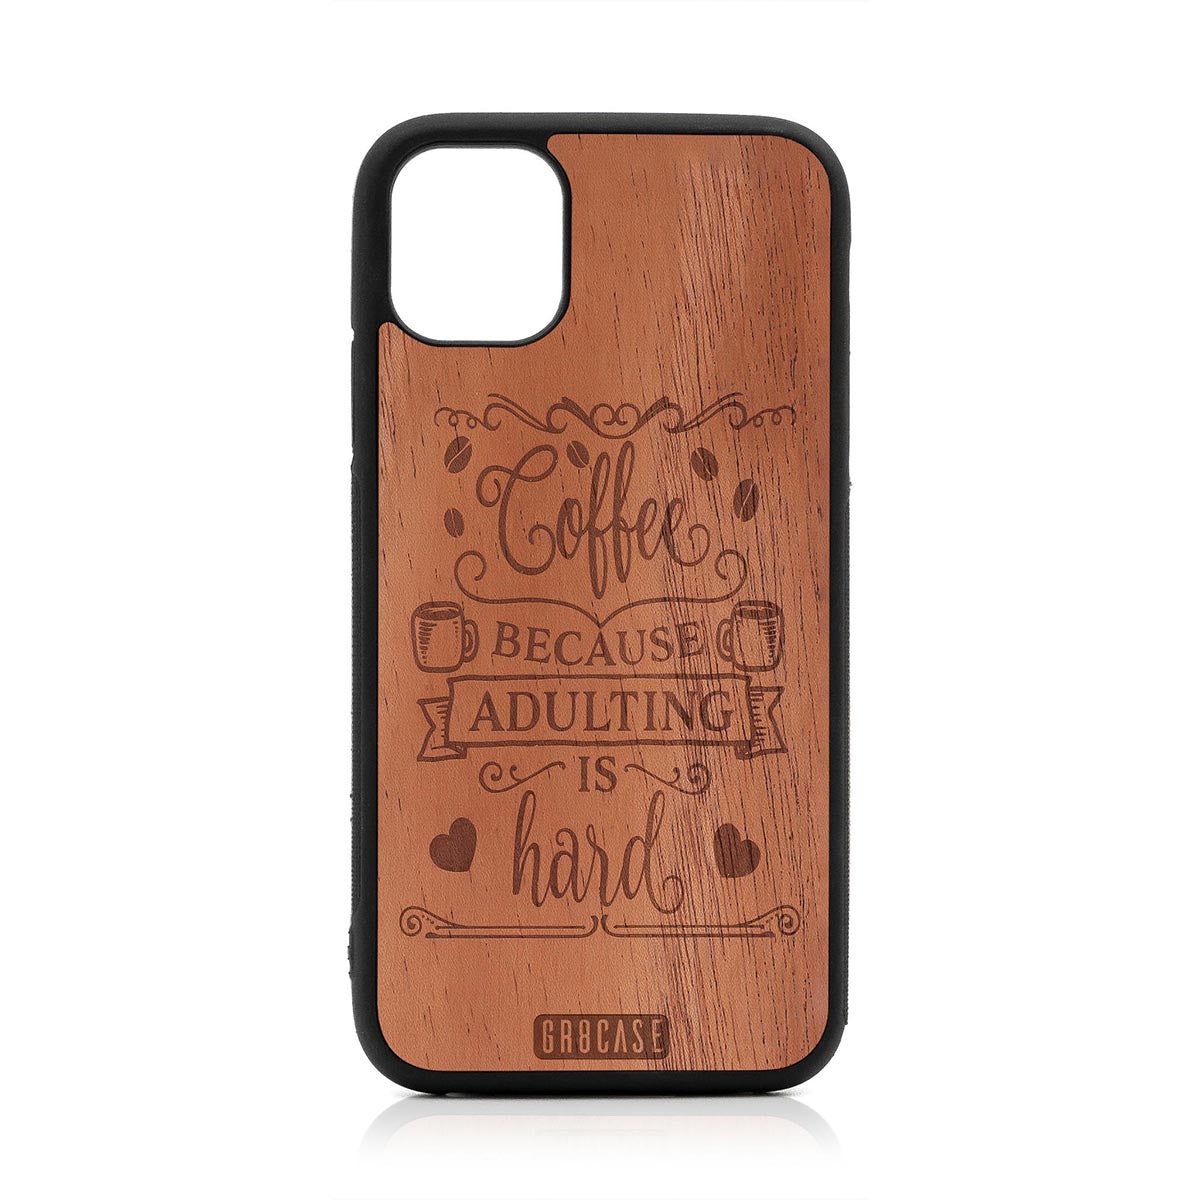 Coffee Because Adulting Is Hard Design Wood Case For iPhone 11 by GR8CASE